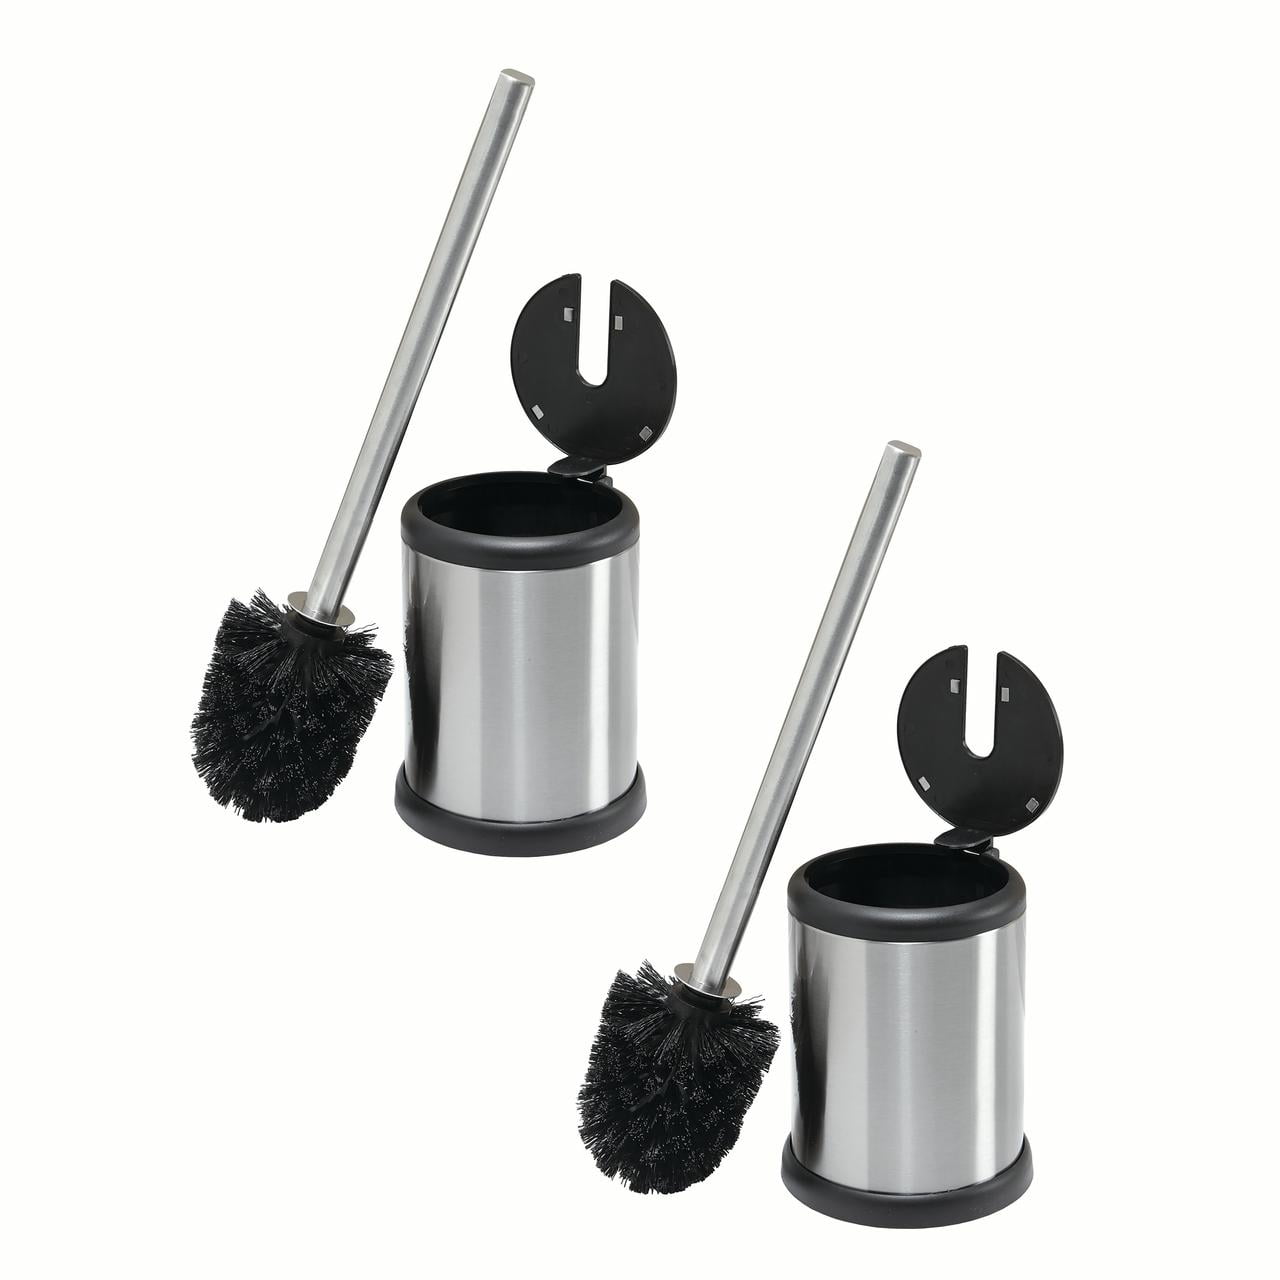 Stainless Steel Toilet Brush with Bowl Holder 